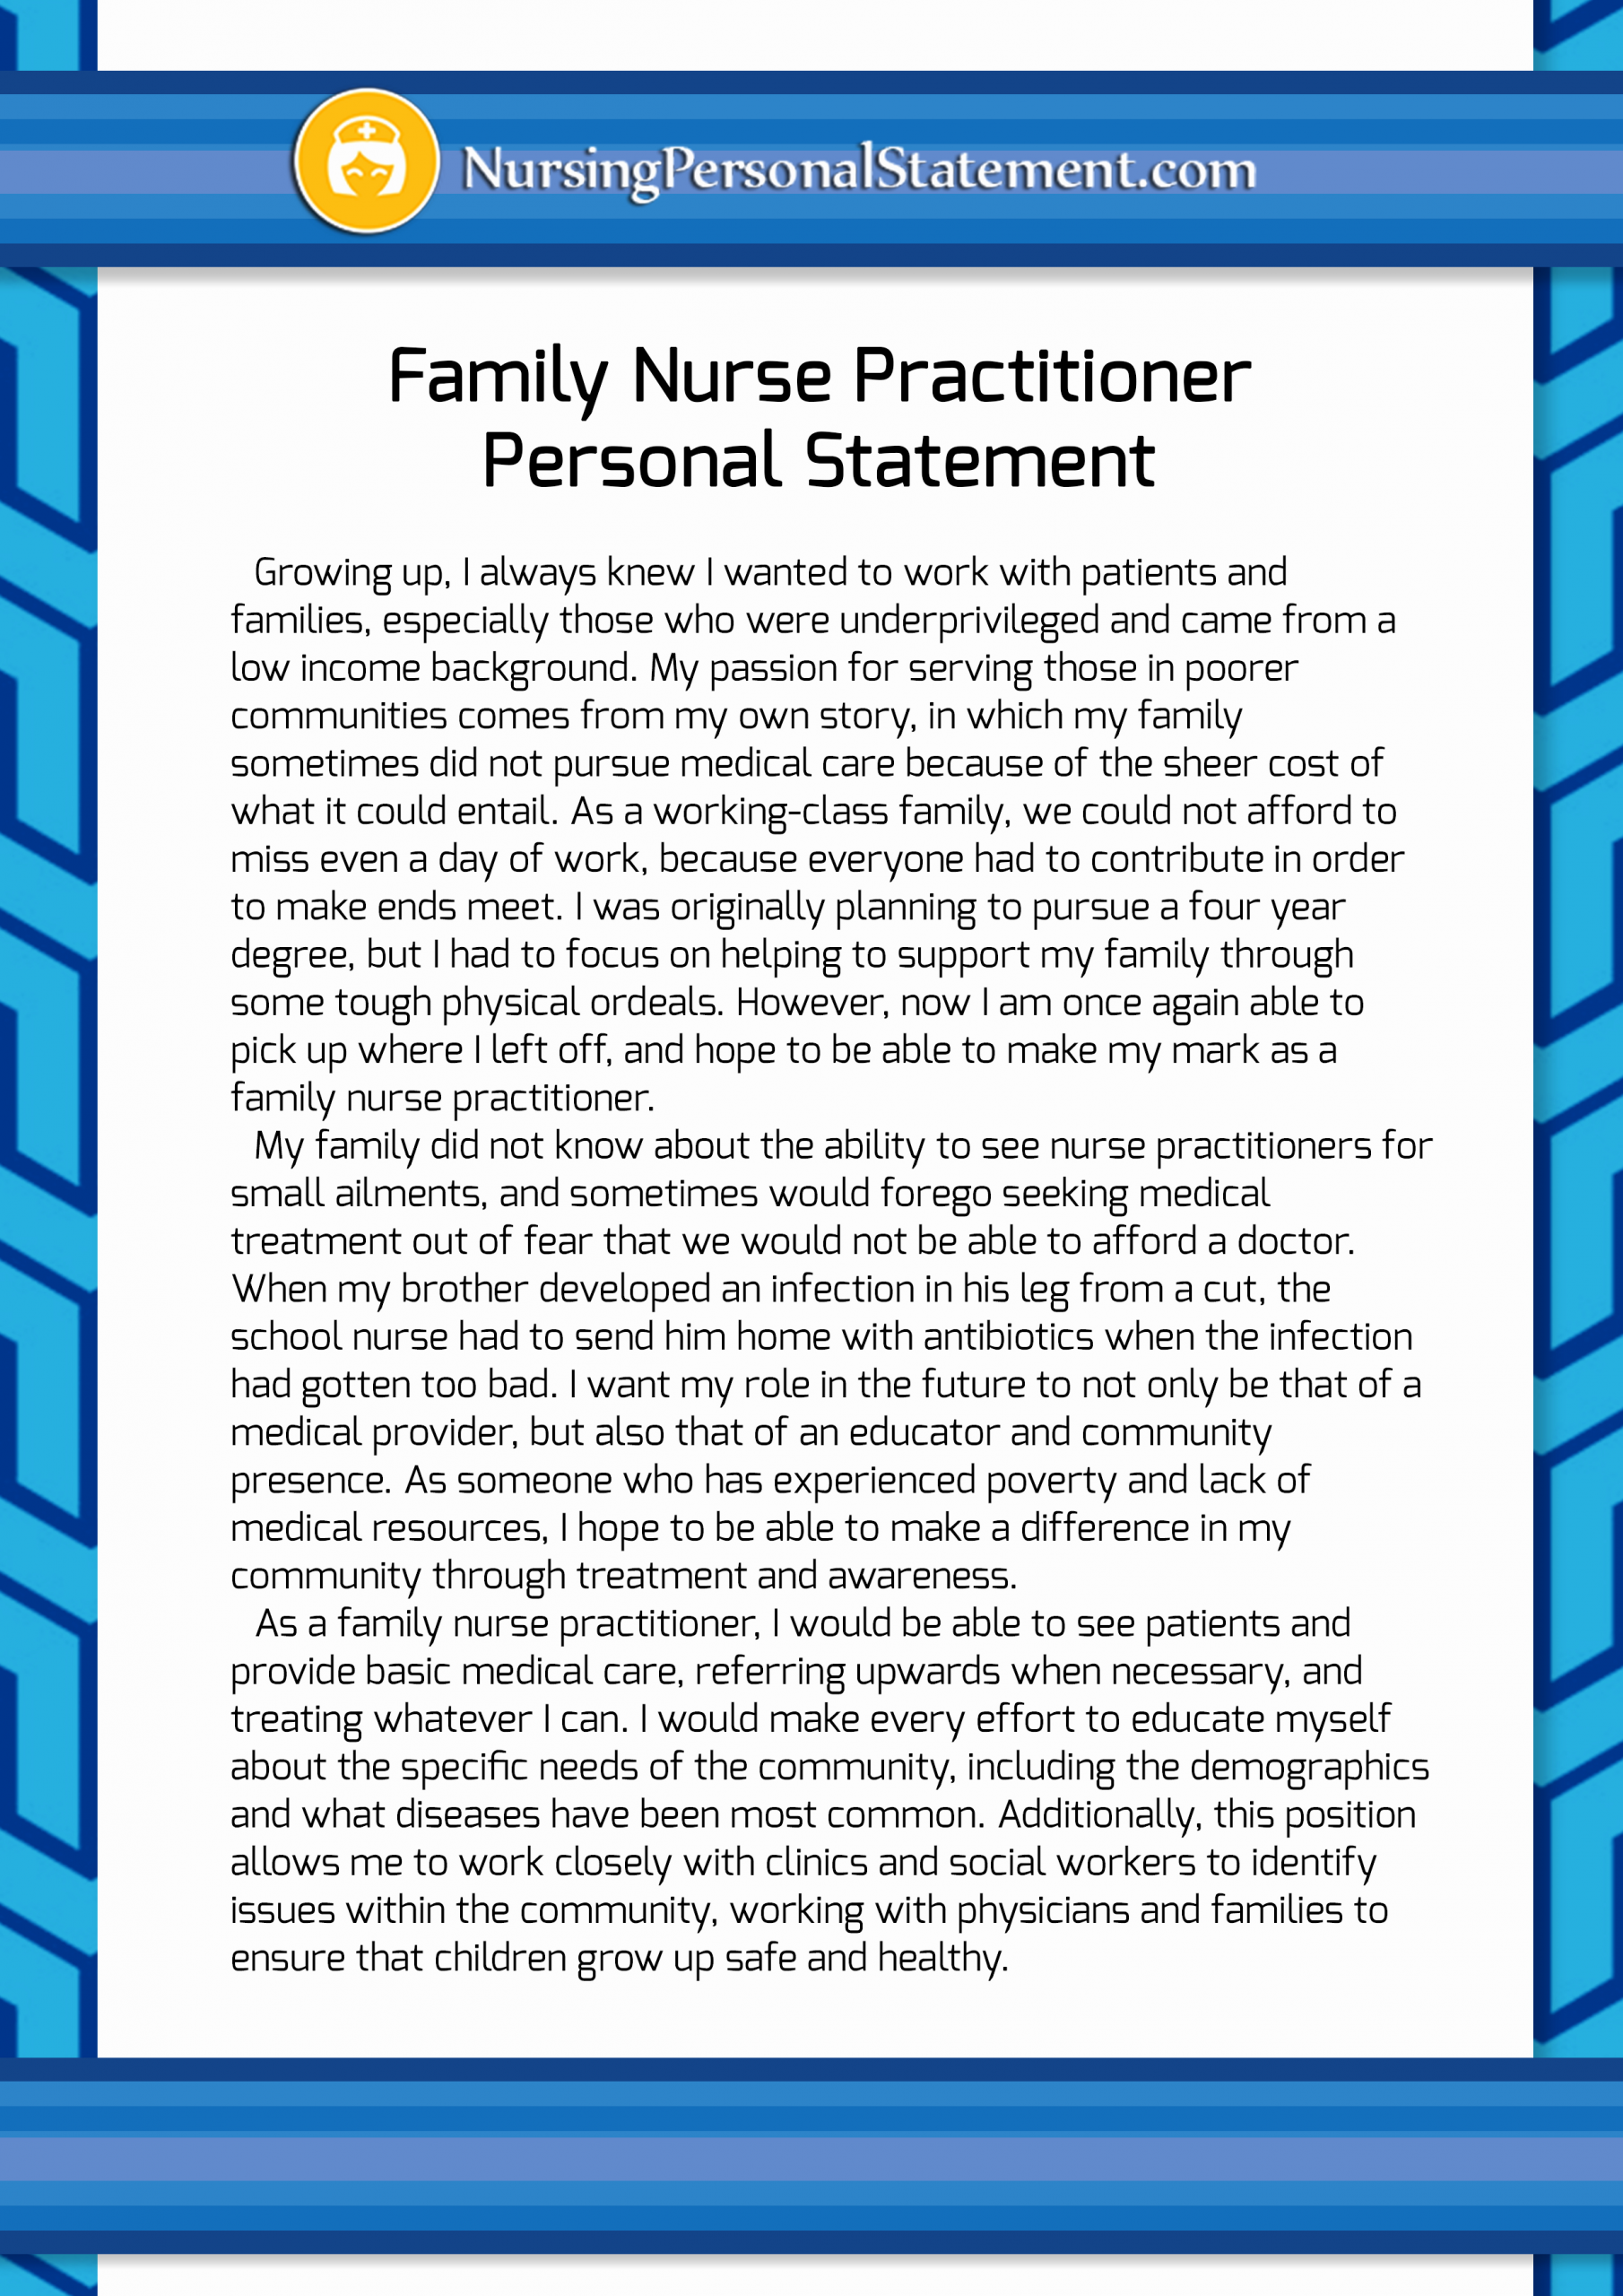 Personal Statement for Nursing School Beautiful Family Nurse Practitioner Personal Statement